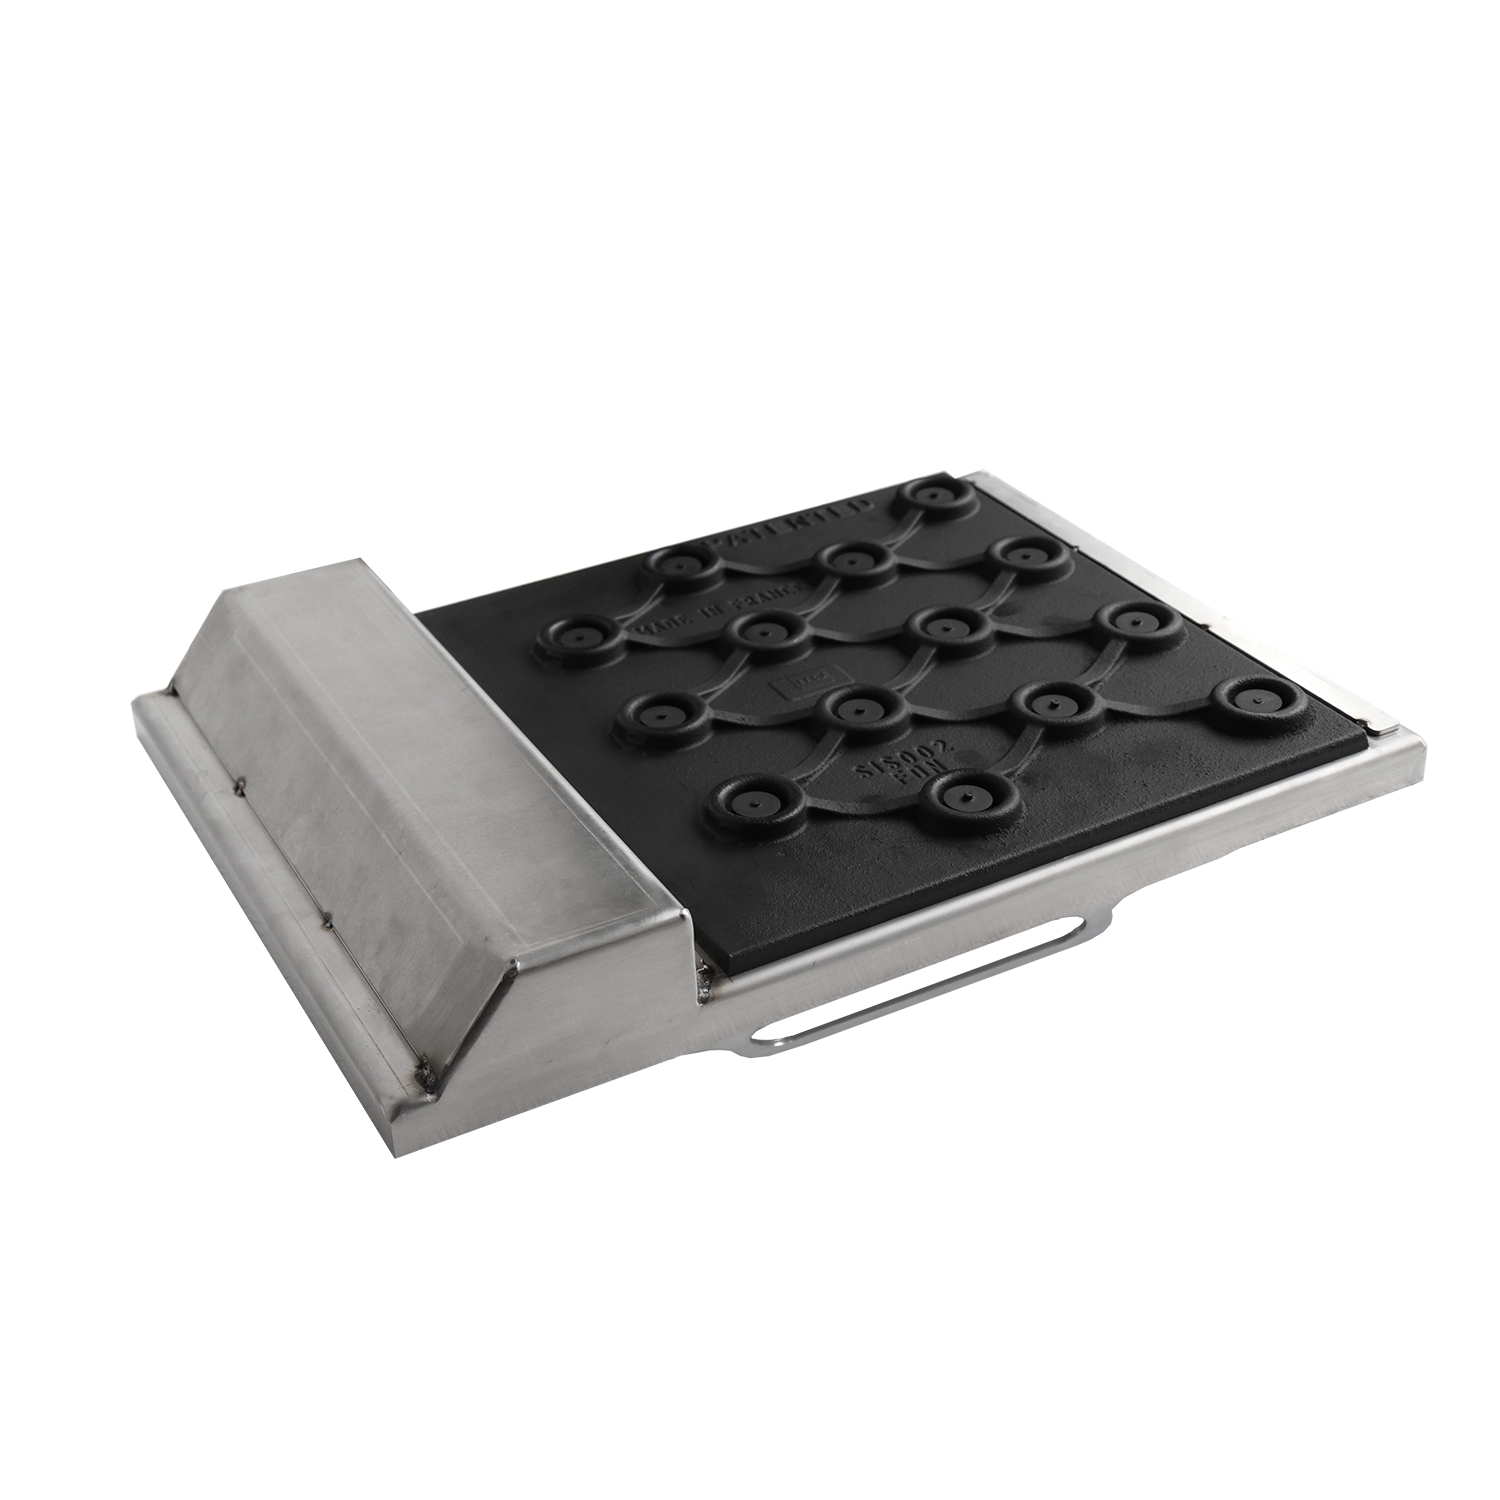 Dual Plate SS Griddle – by Le Griddle for Cutlass Pro Series Grills (RON) 14 1/4" x 19 3/4"